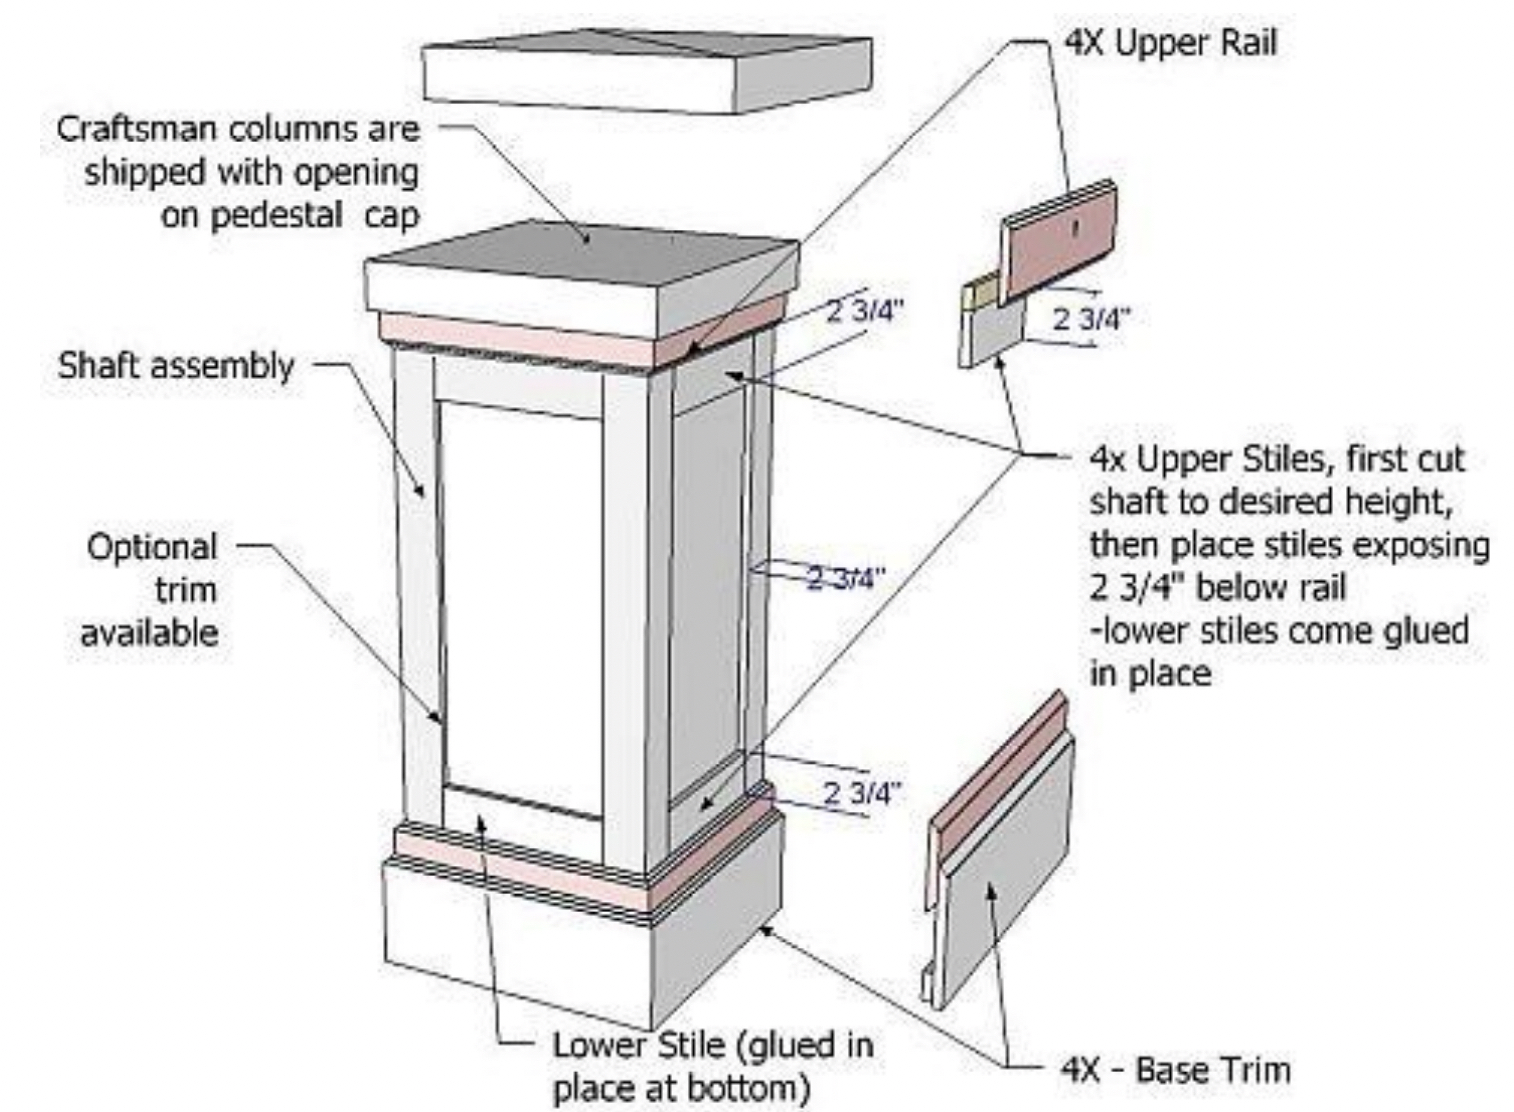 The components of an exterior pvc pedestal